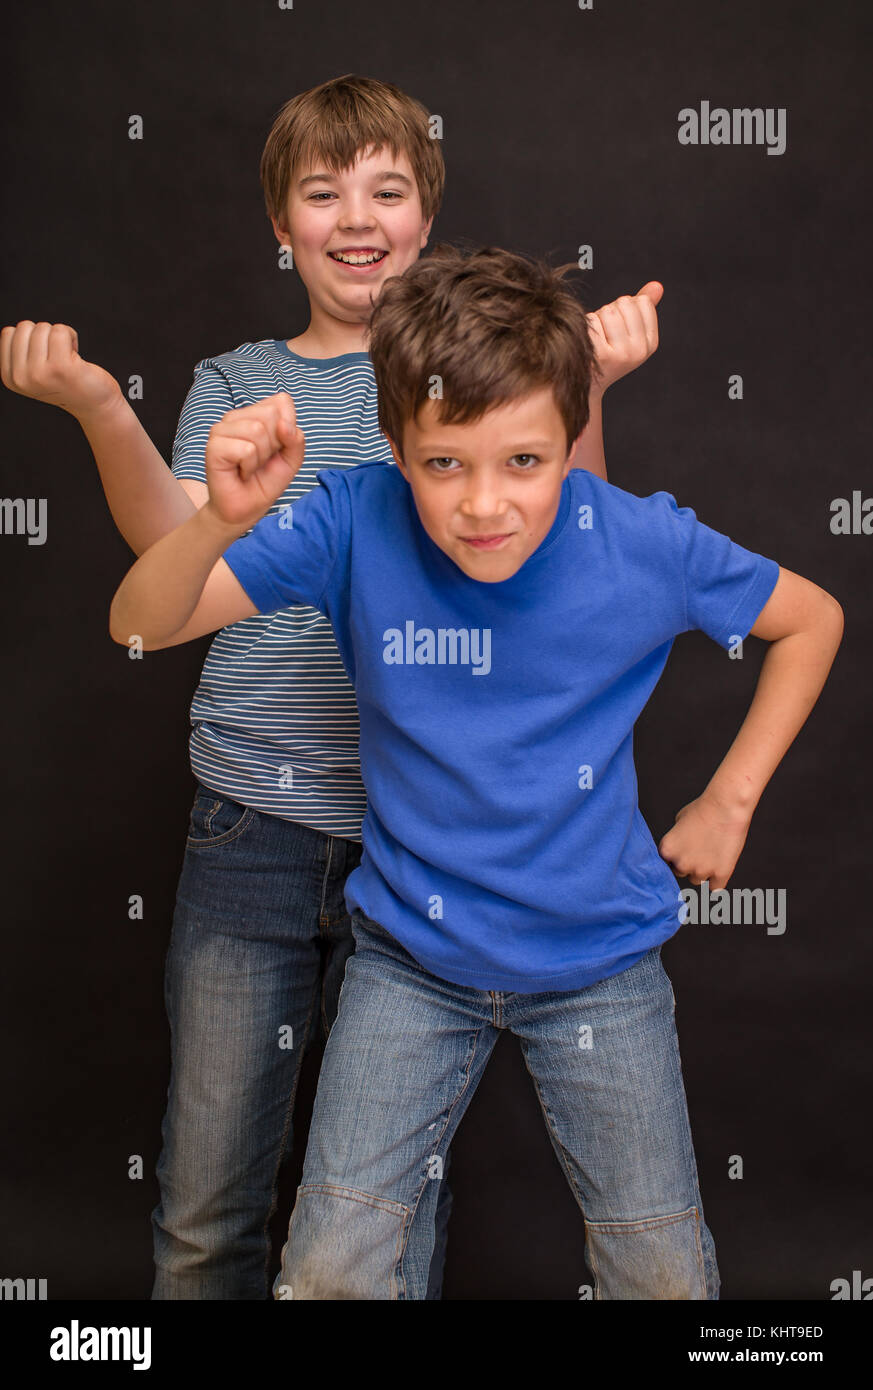 Brothers having fun whilst posing. Boys portrait, young little cute and adorable kids, little obstreperous scamps. Poses, face expressions, ease. Stock Photo